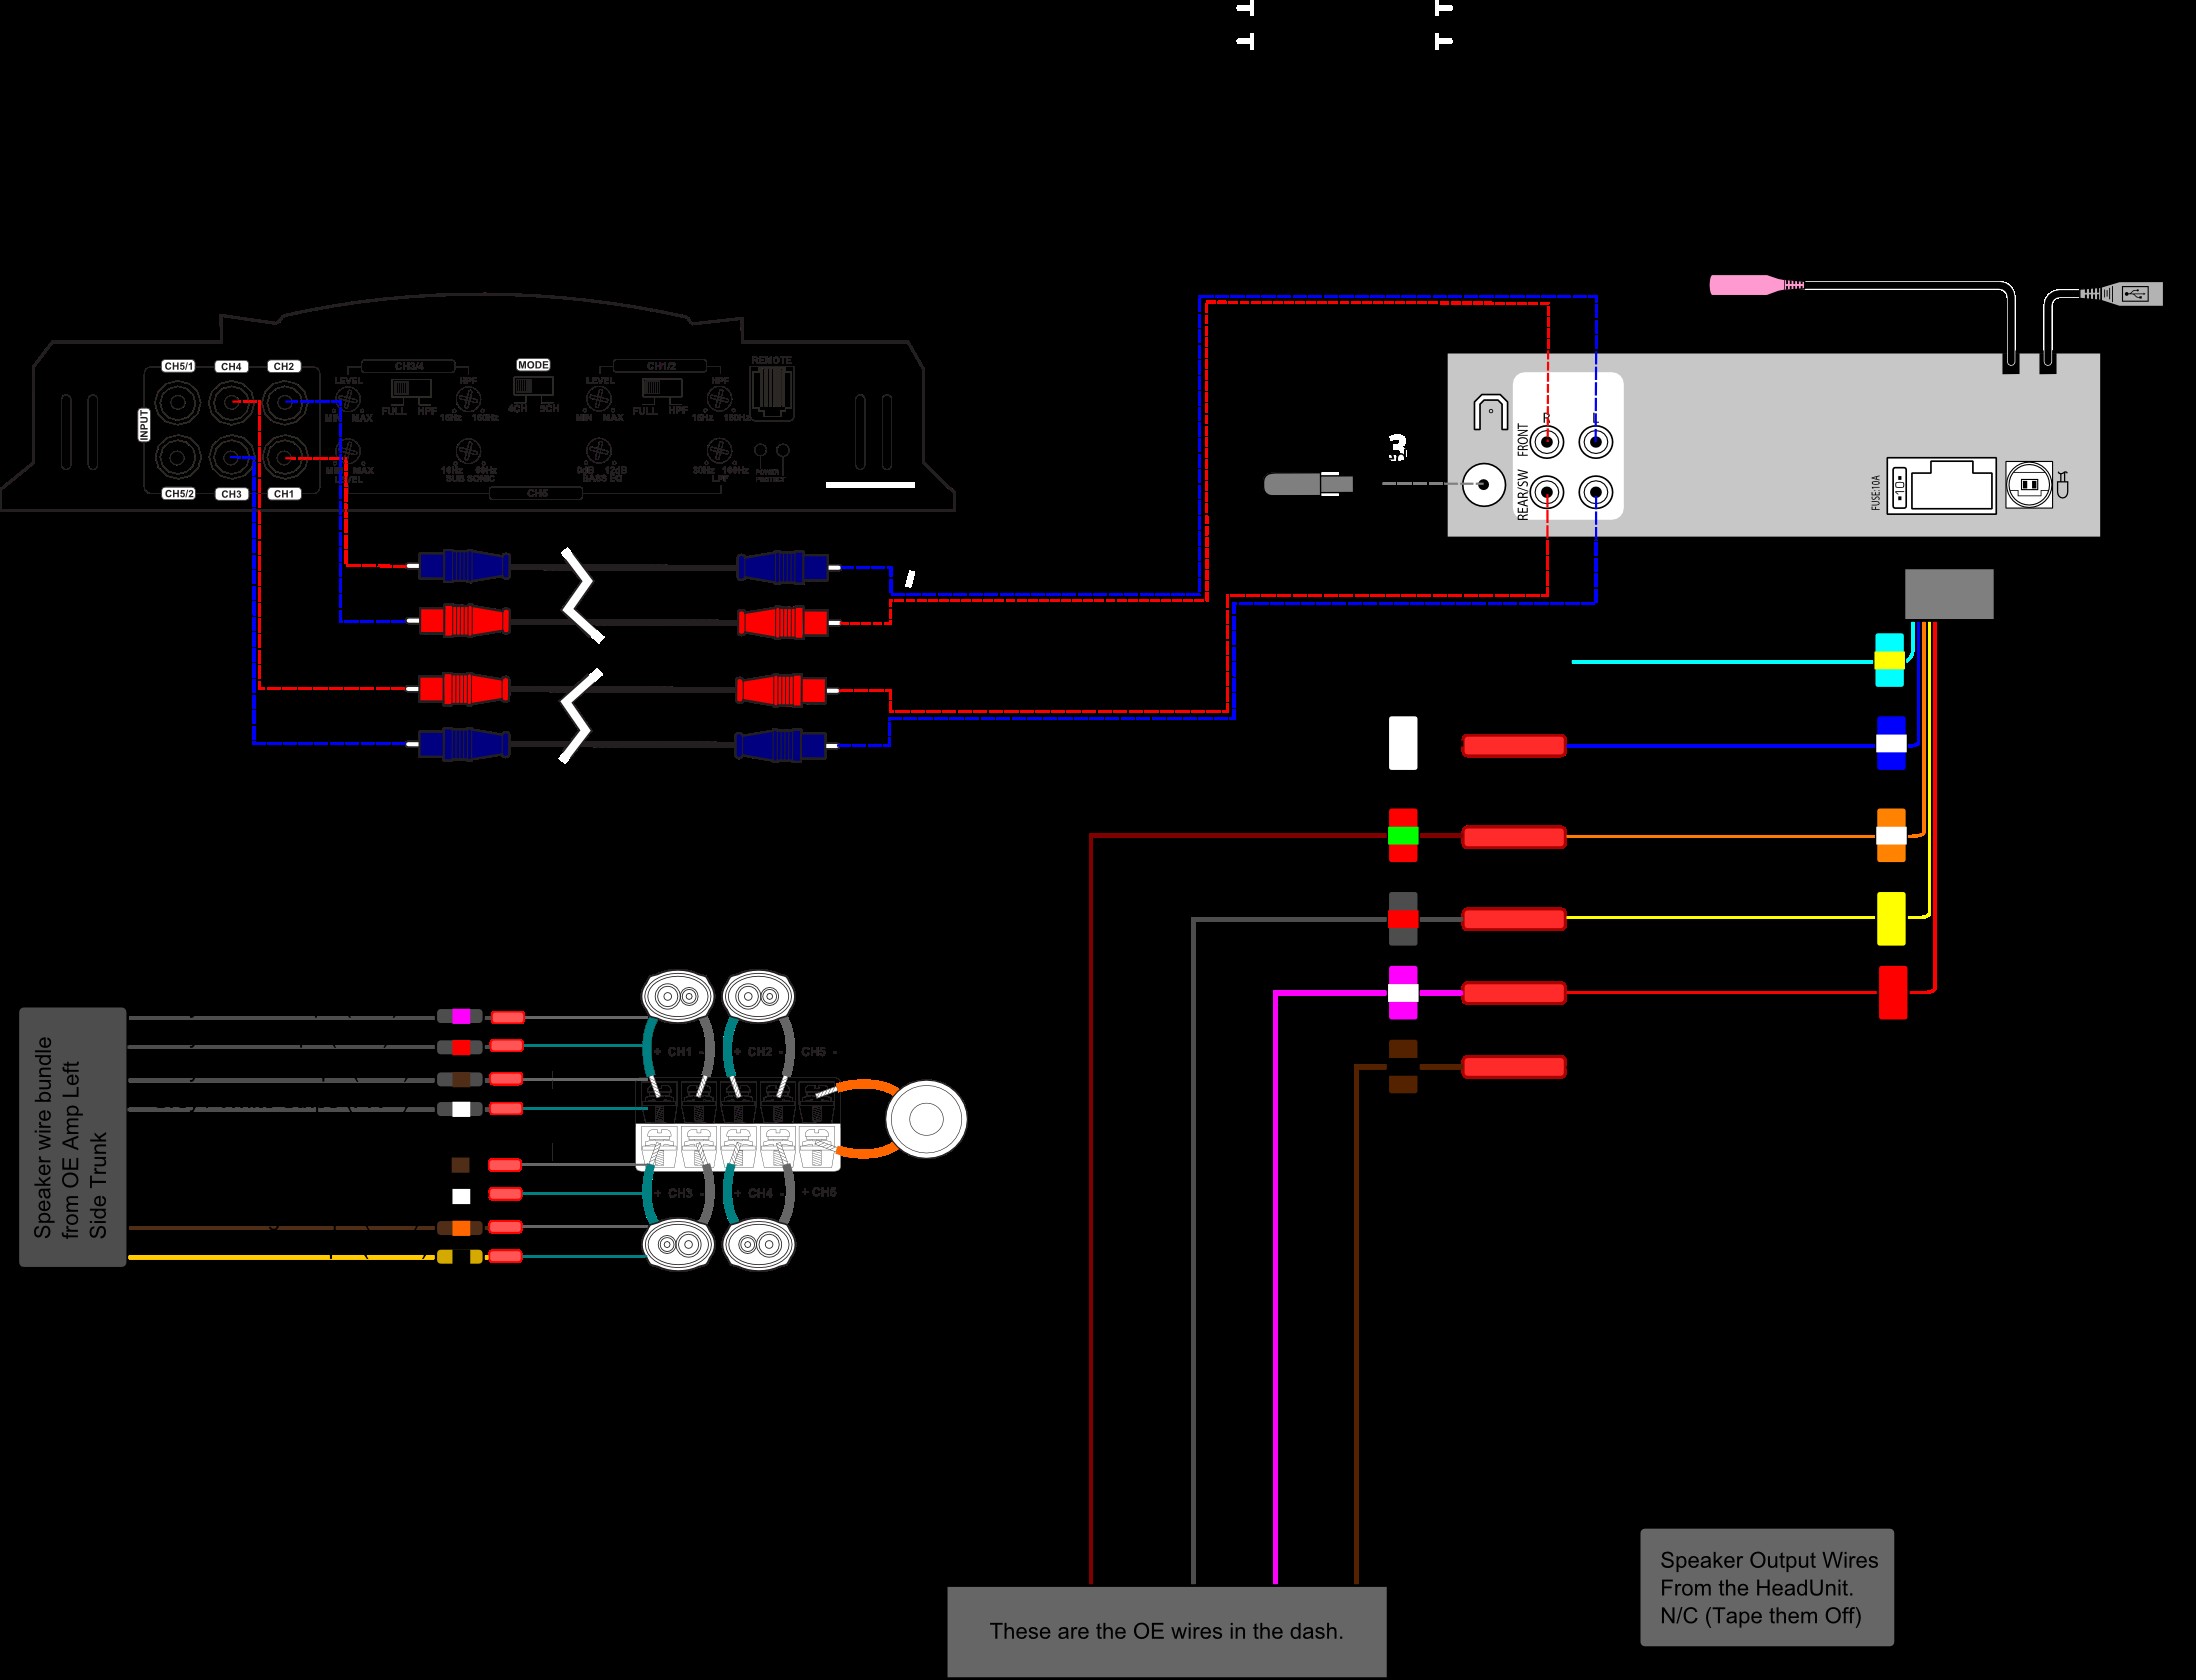 Jvc Car Audio Wiring Diagram Car Audio Wiring Diagrams Jvc Stereo Diagram Color On within Auto Of Jvc Car Audio Wiring Diagram